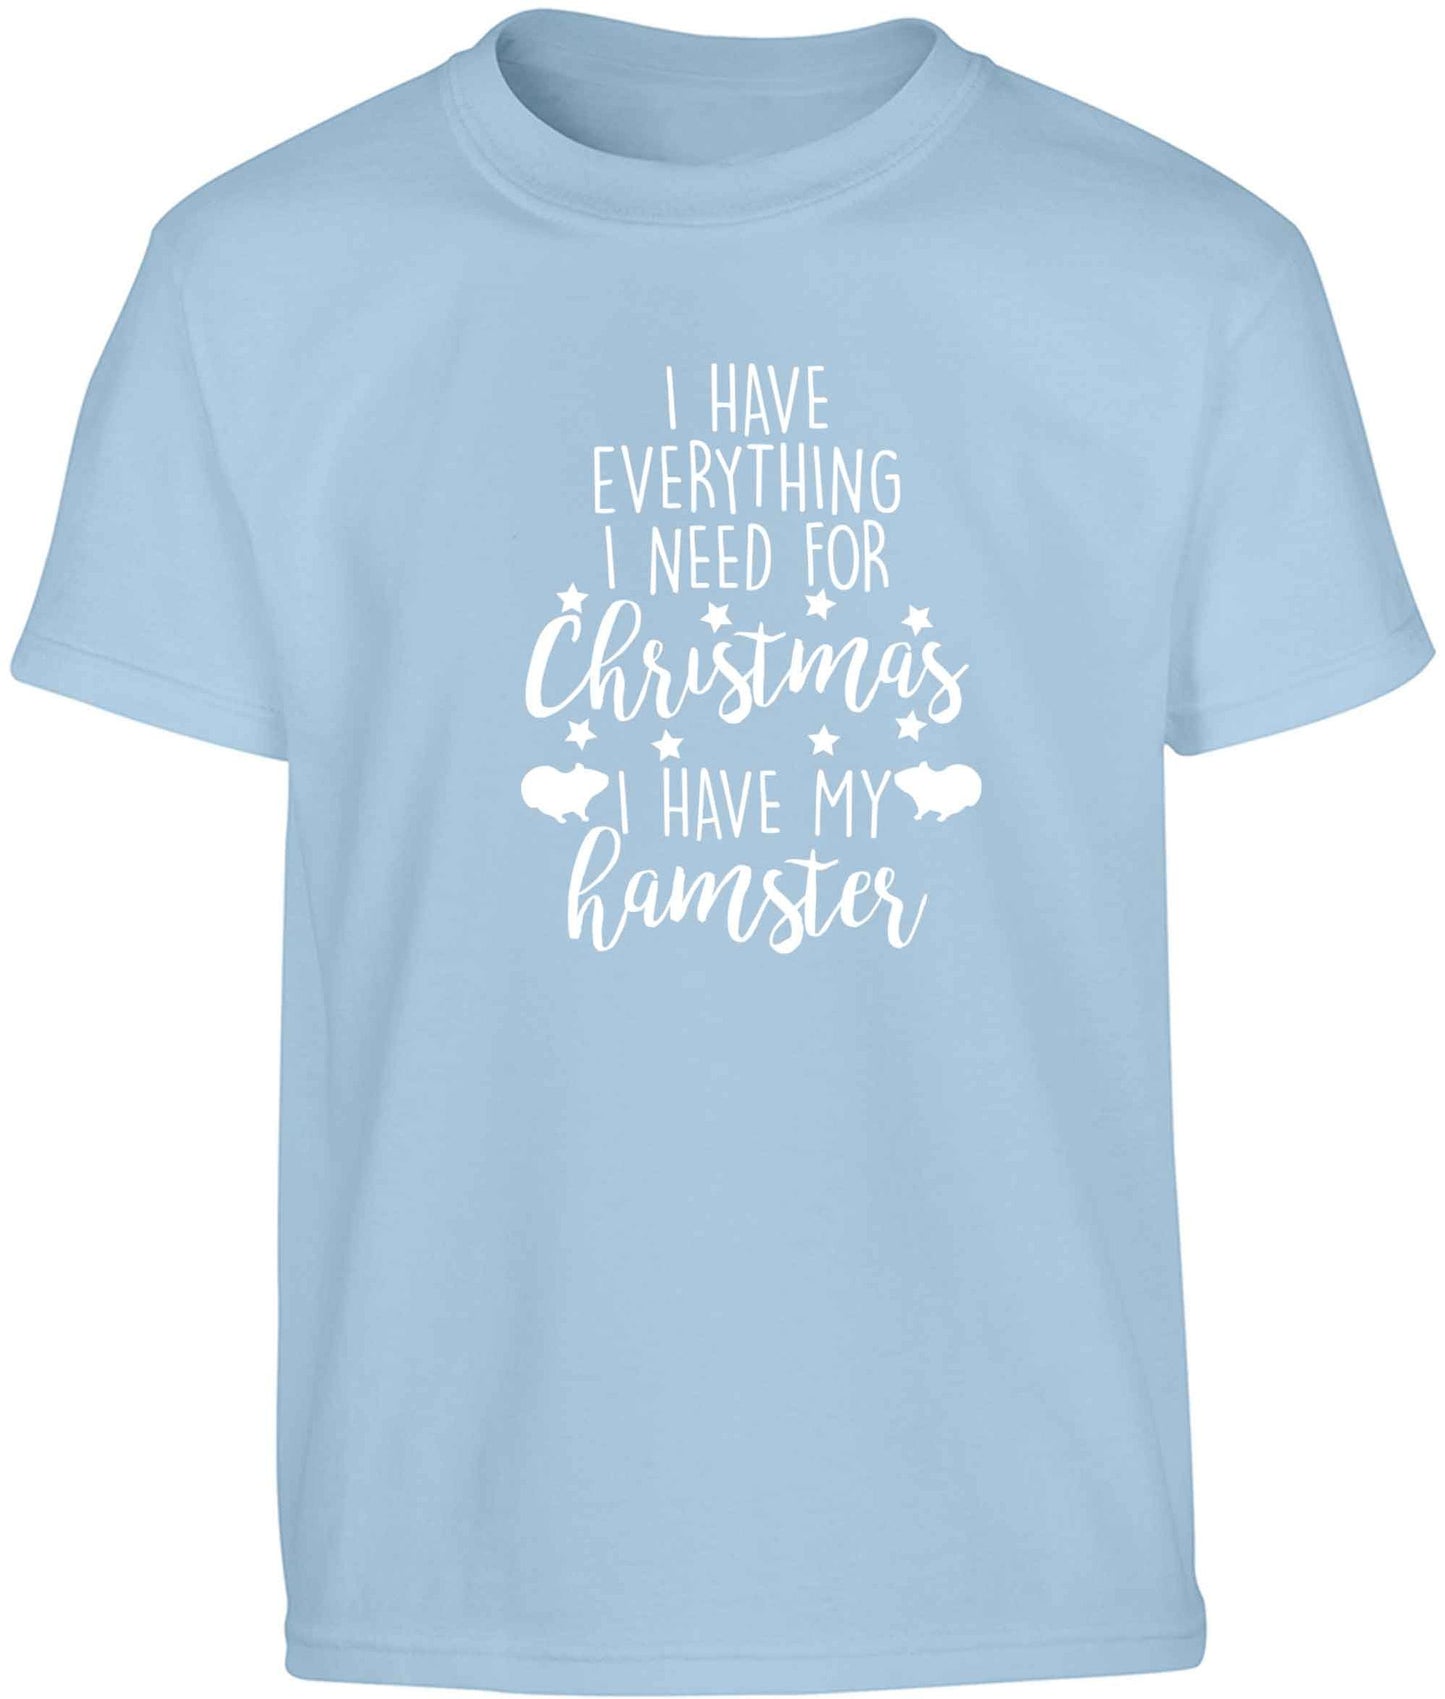 I have everything I need for Christmas I have my hamster Children's light blue Tshirt 12-13 Years